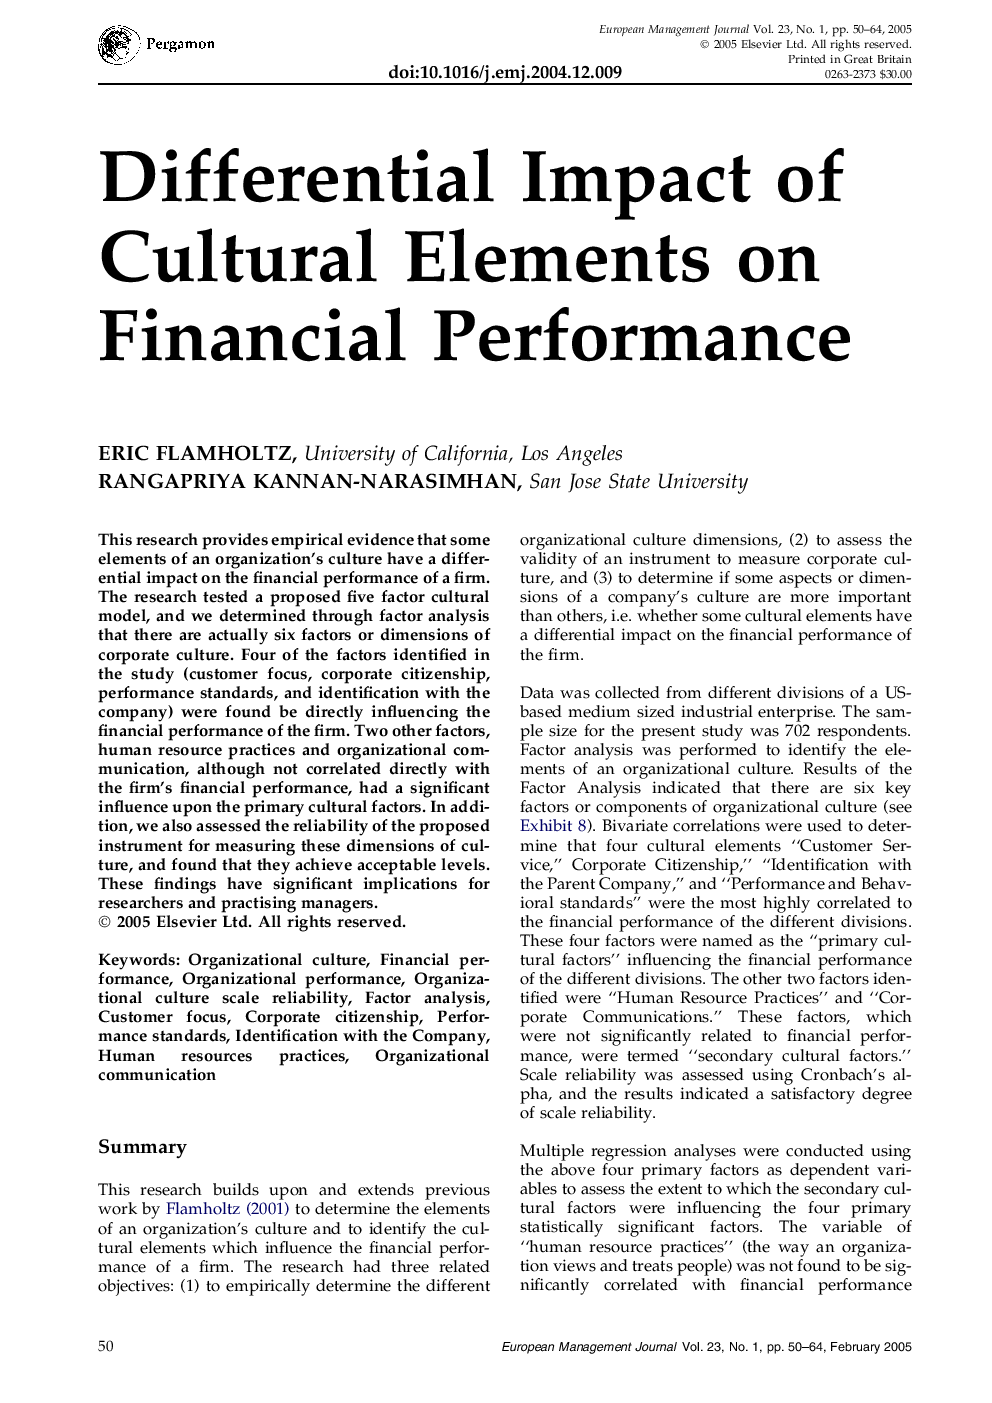 Differential Impact of Cultural Elements on Financial Performance